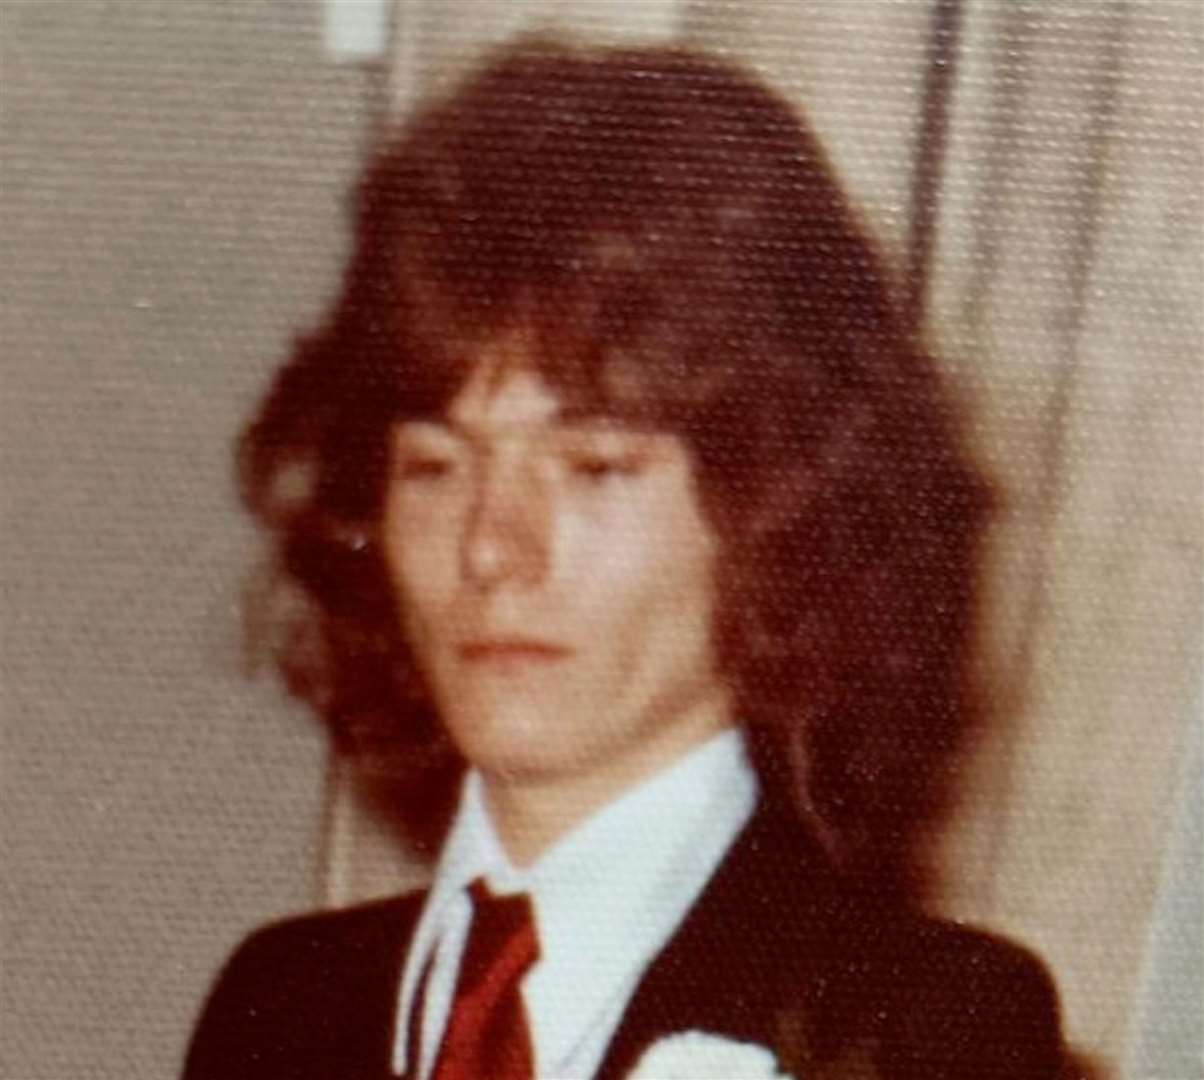 He was hired at 18 years old, seen here circa 1972. Picture: SWNS